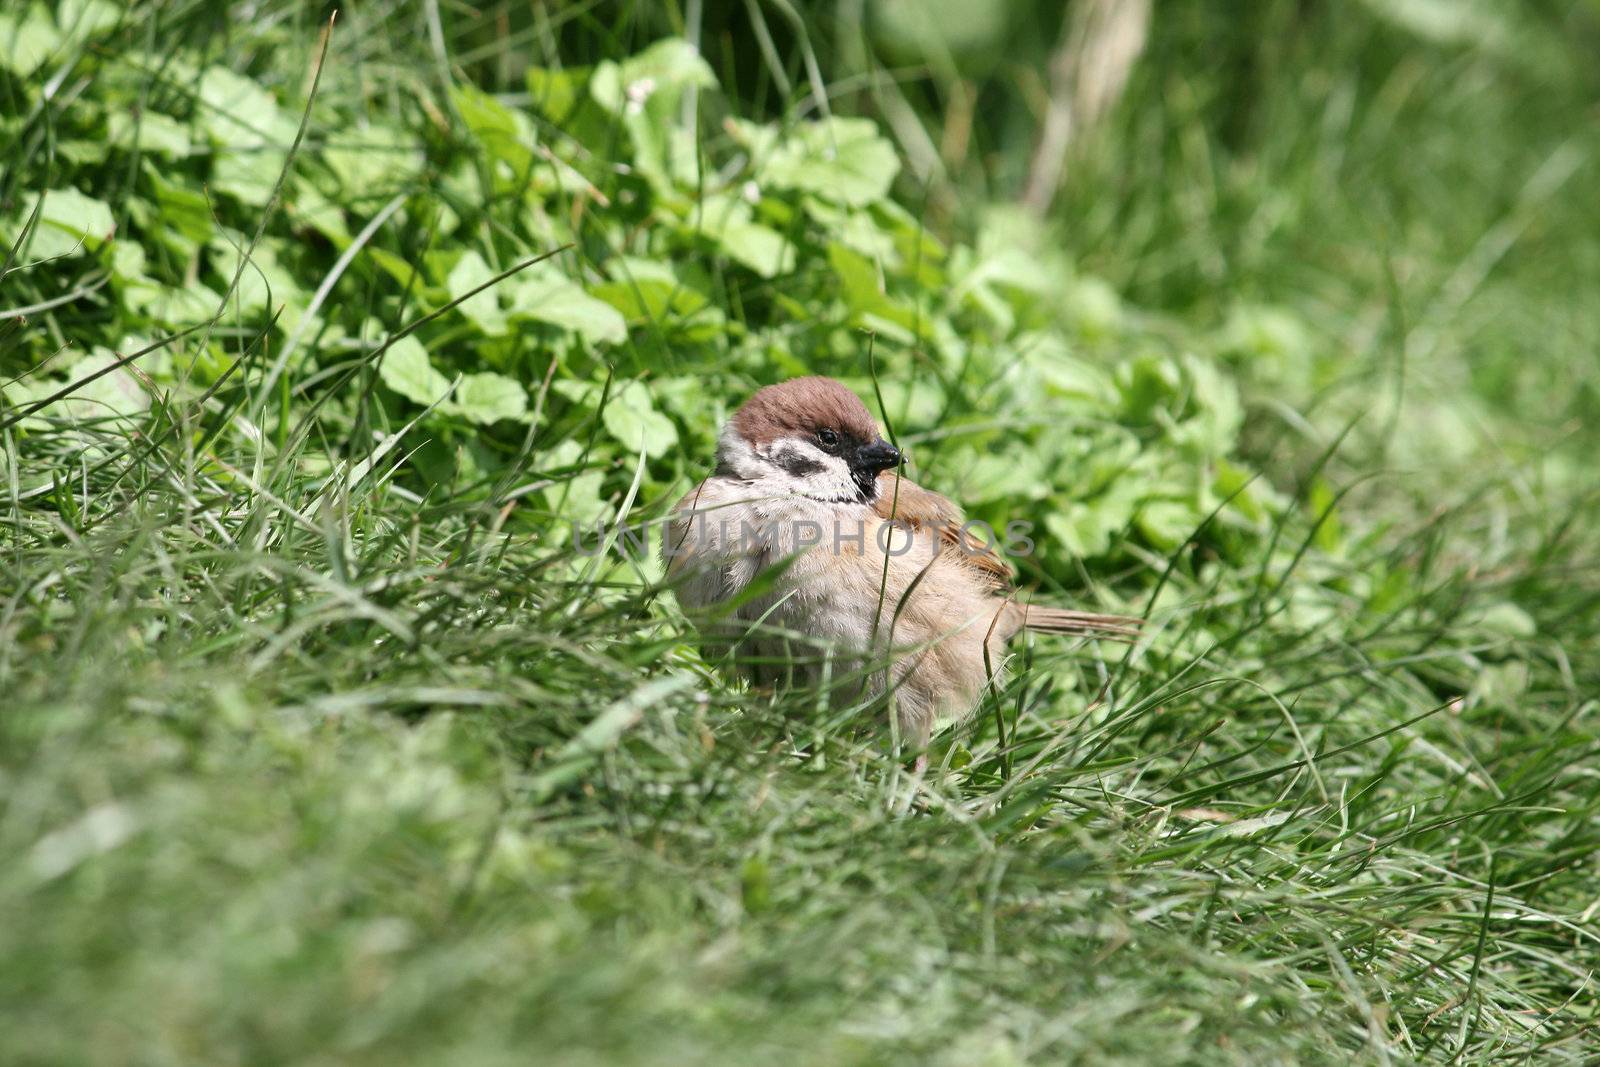 sparrow walking on the grass searching for food